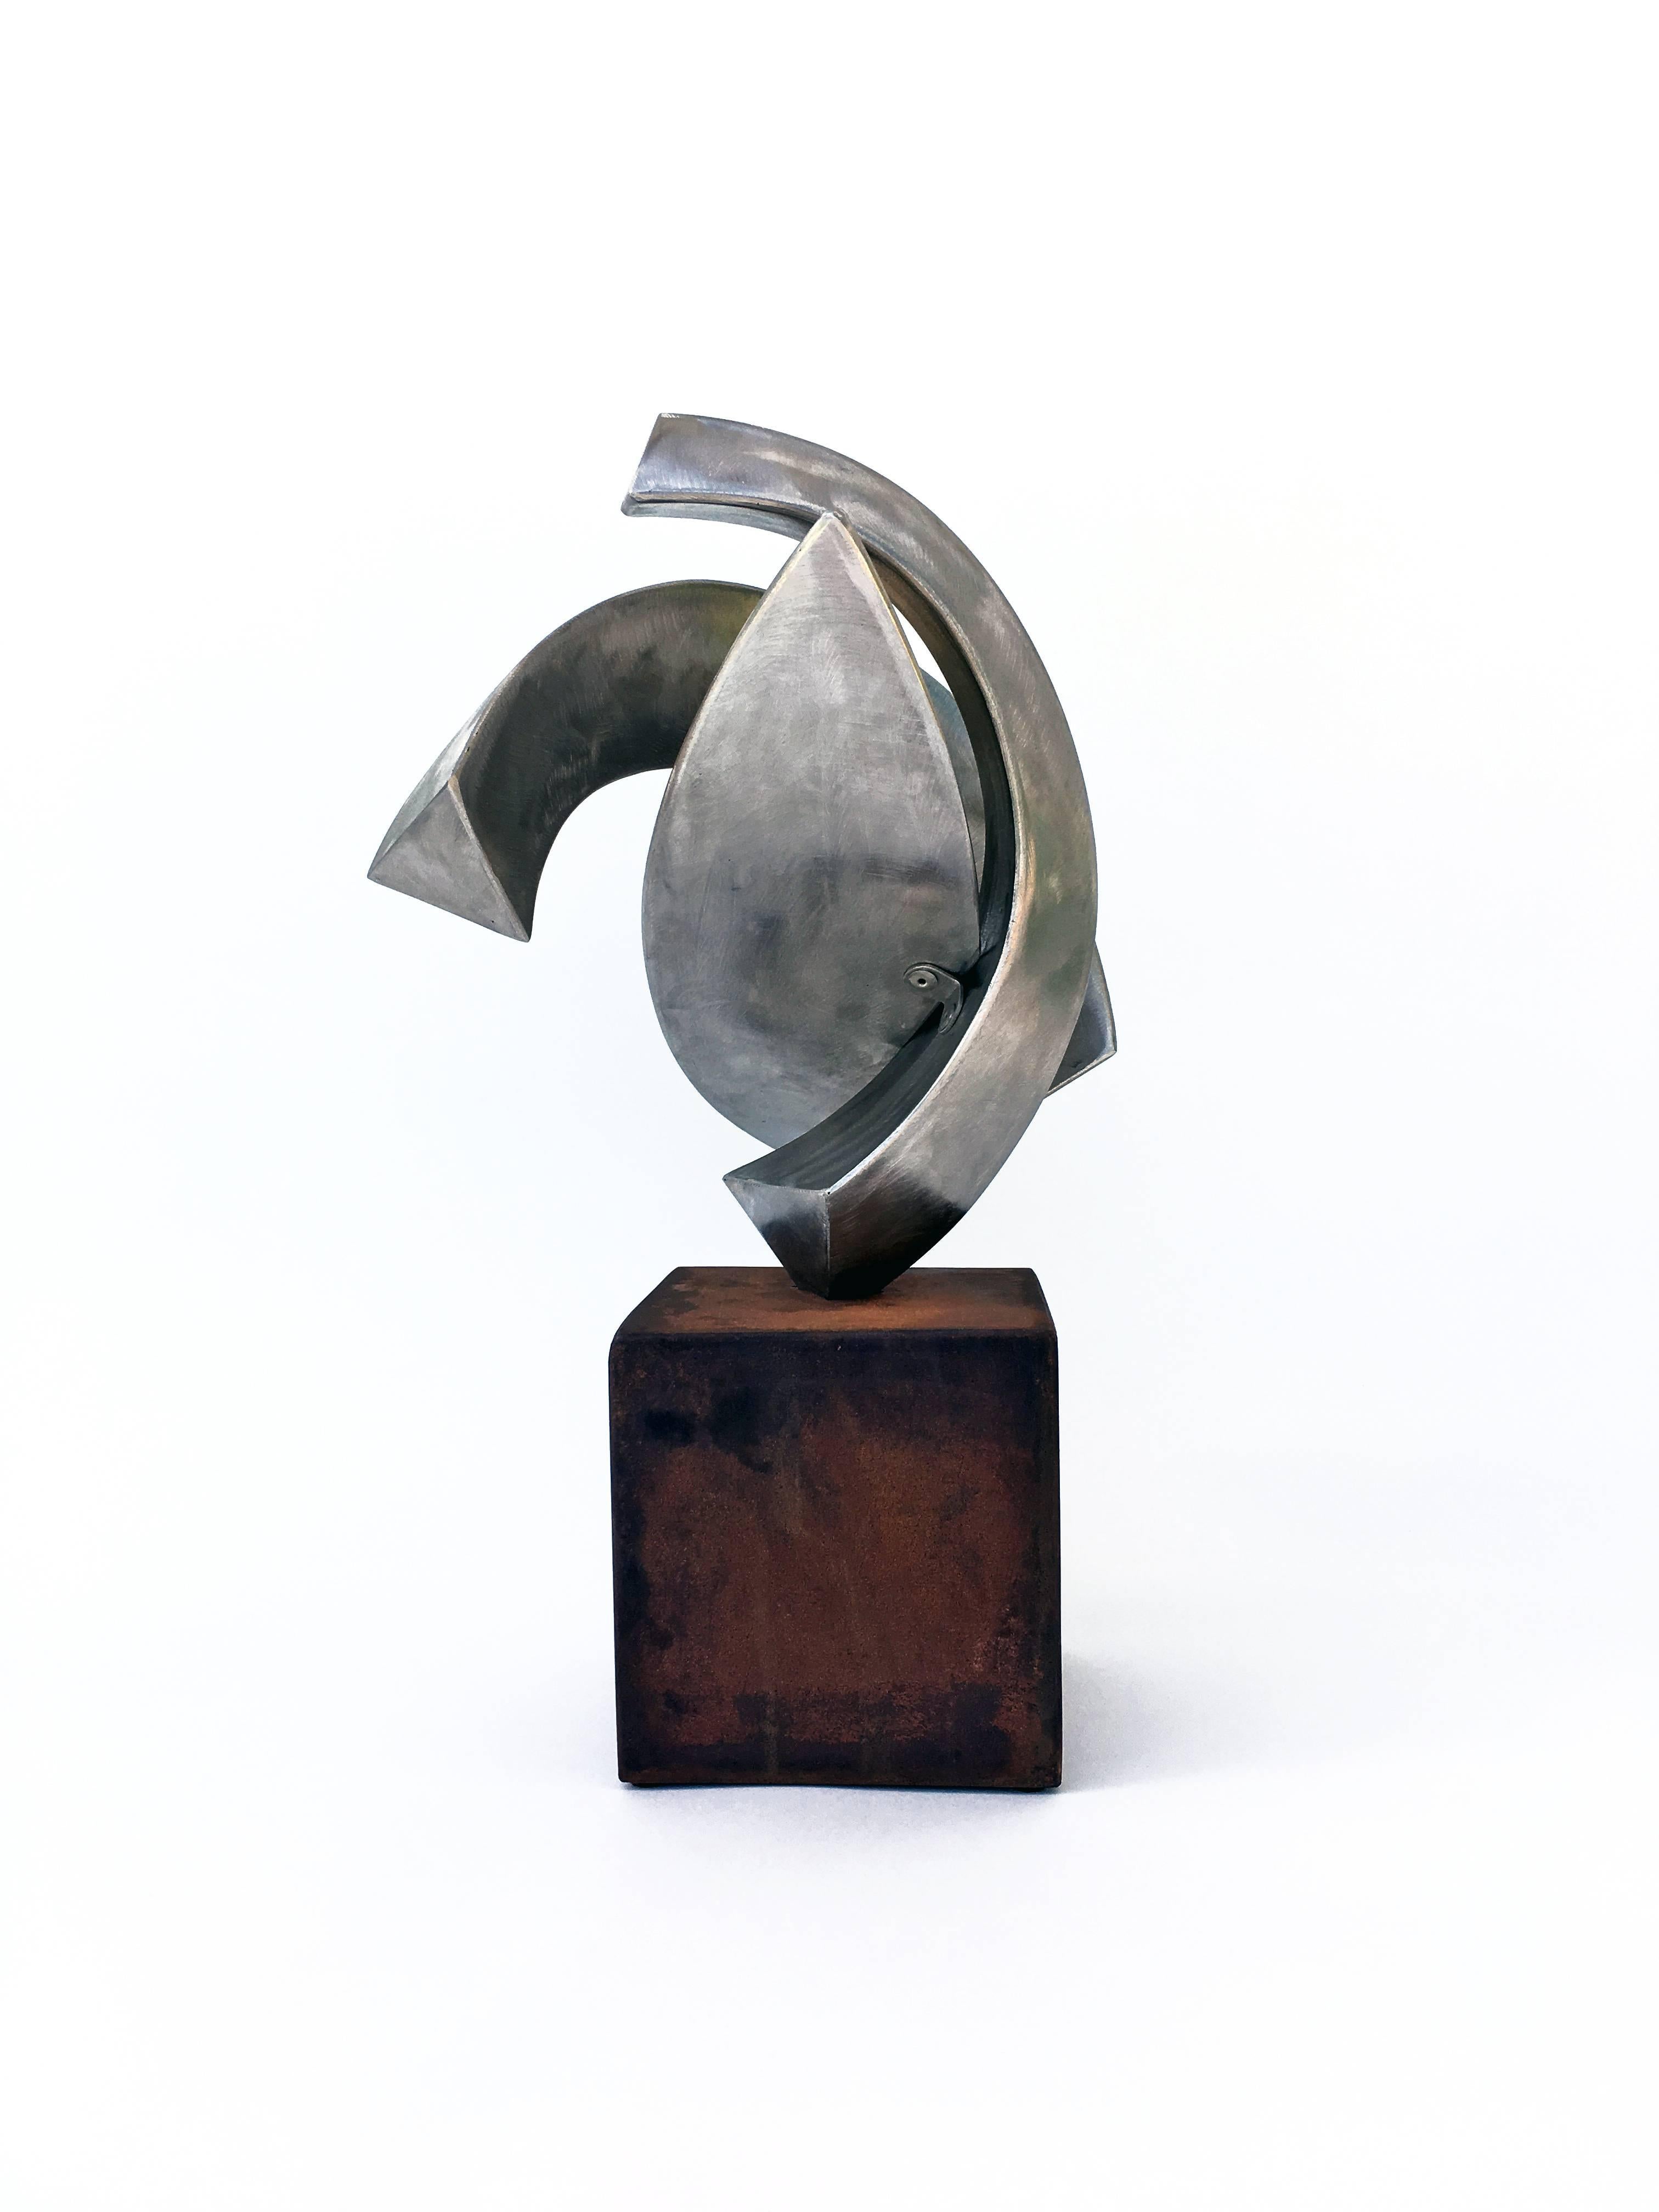 Genoma III - Abstract Geometric Sculpture by Carlos Gonzalez